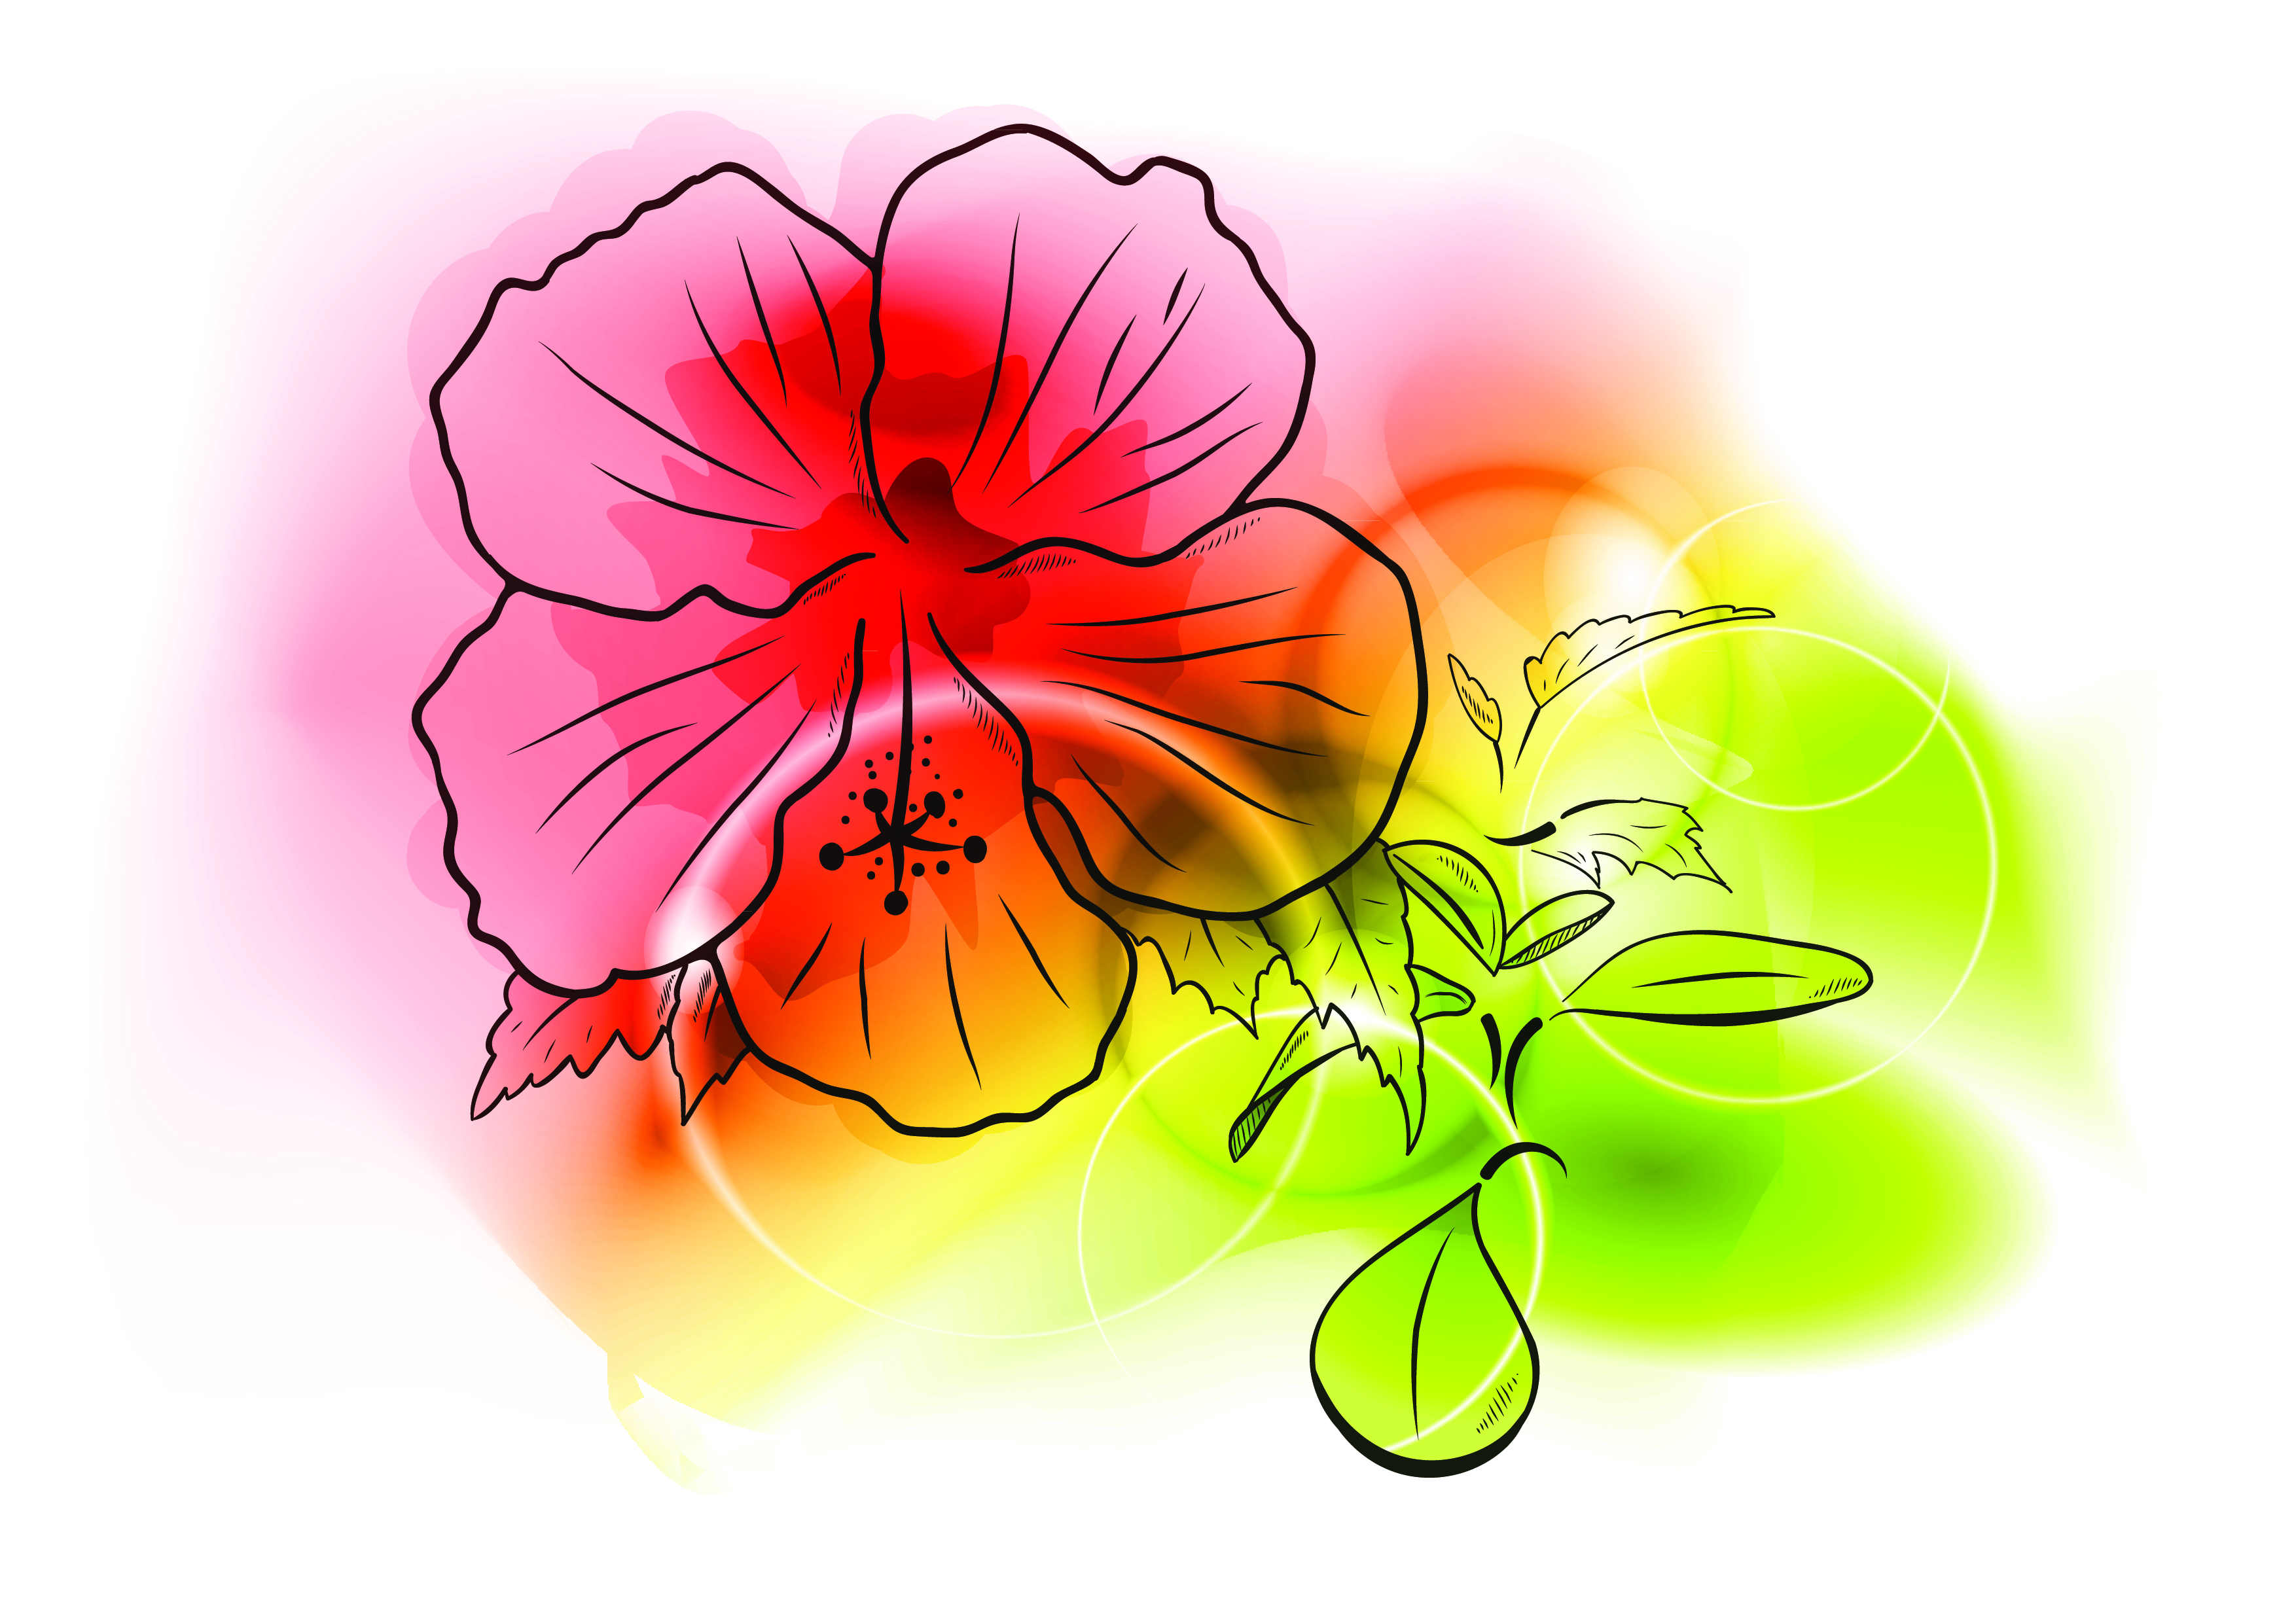 Colorful flowers background vector Free Vector / 4Vector